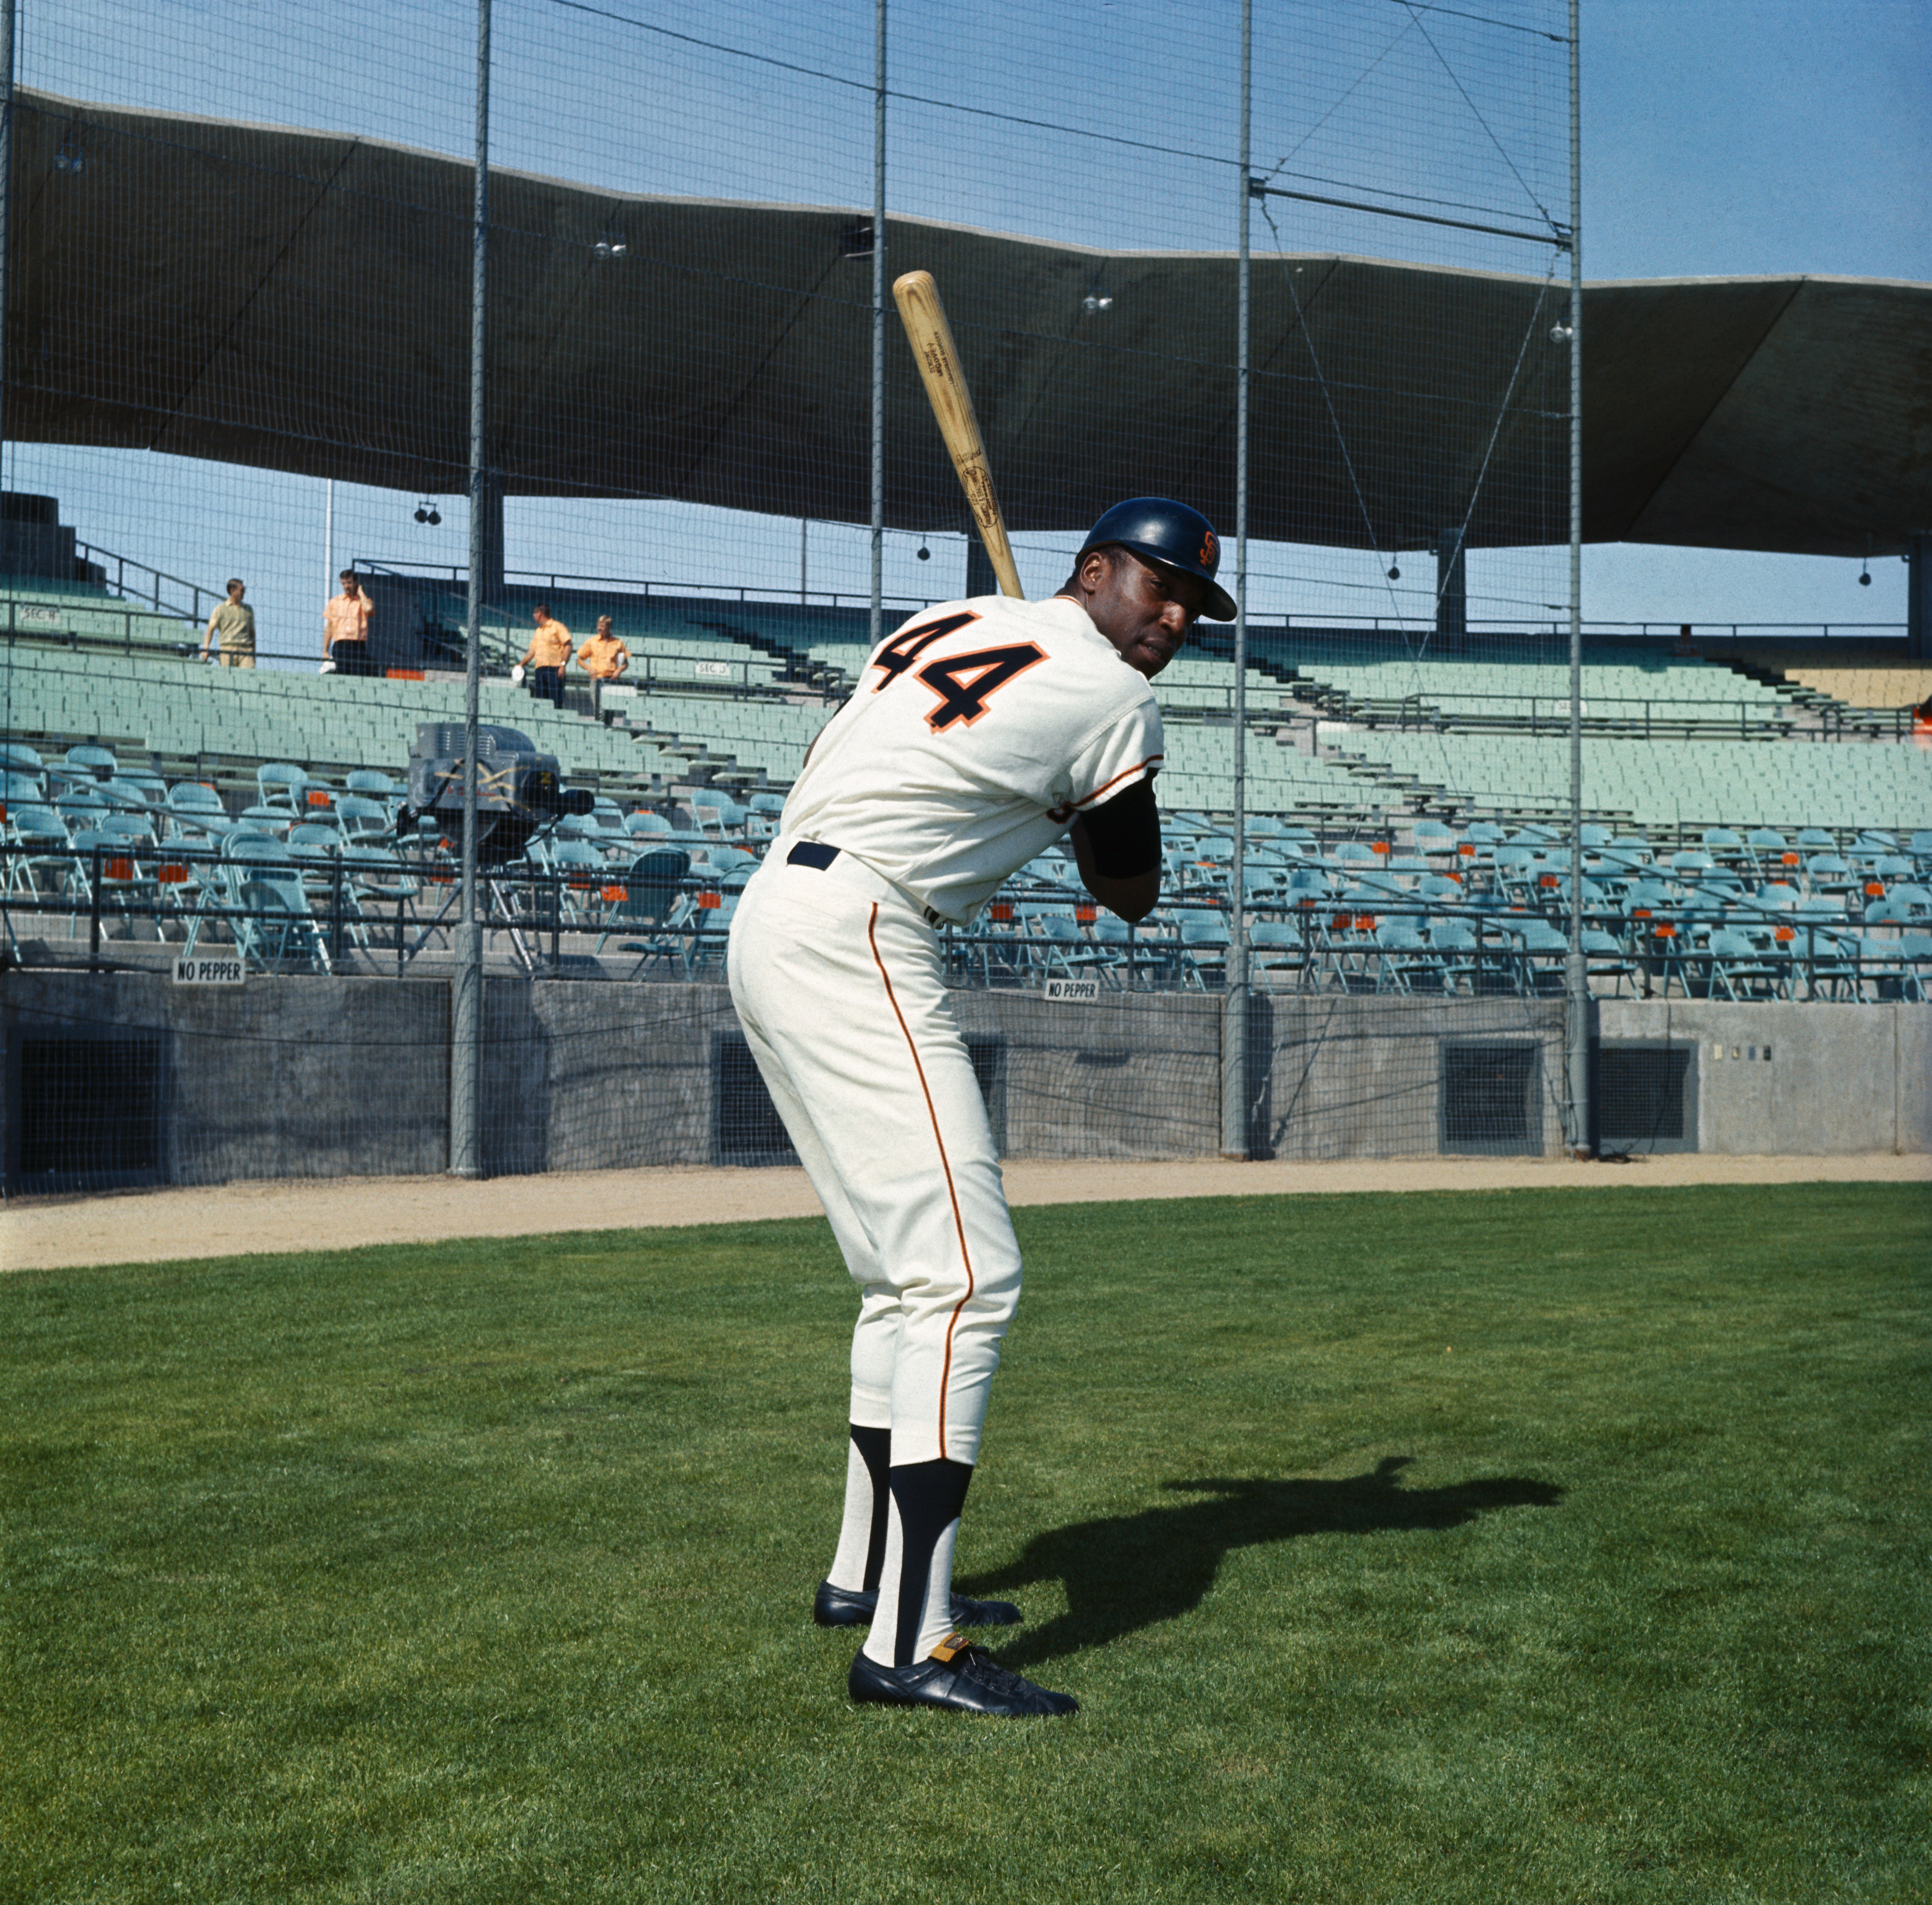 Willie McCovey in Batting Position